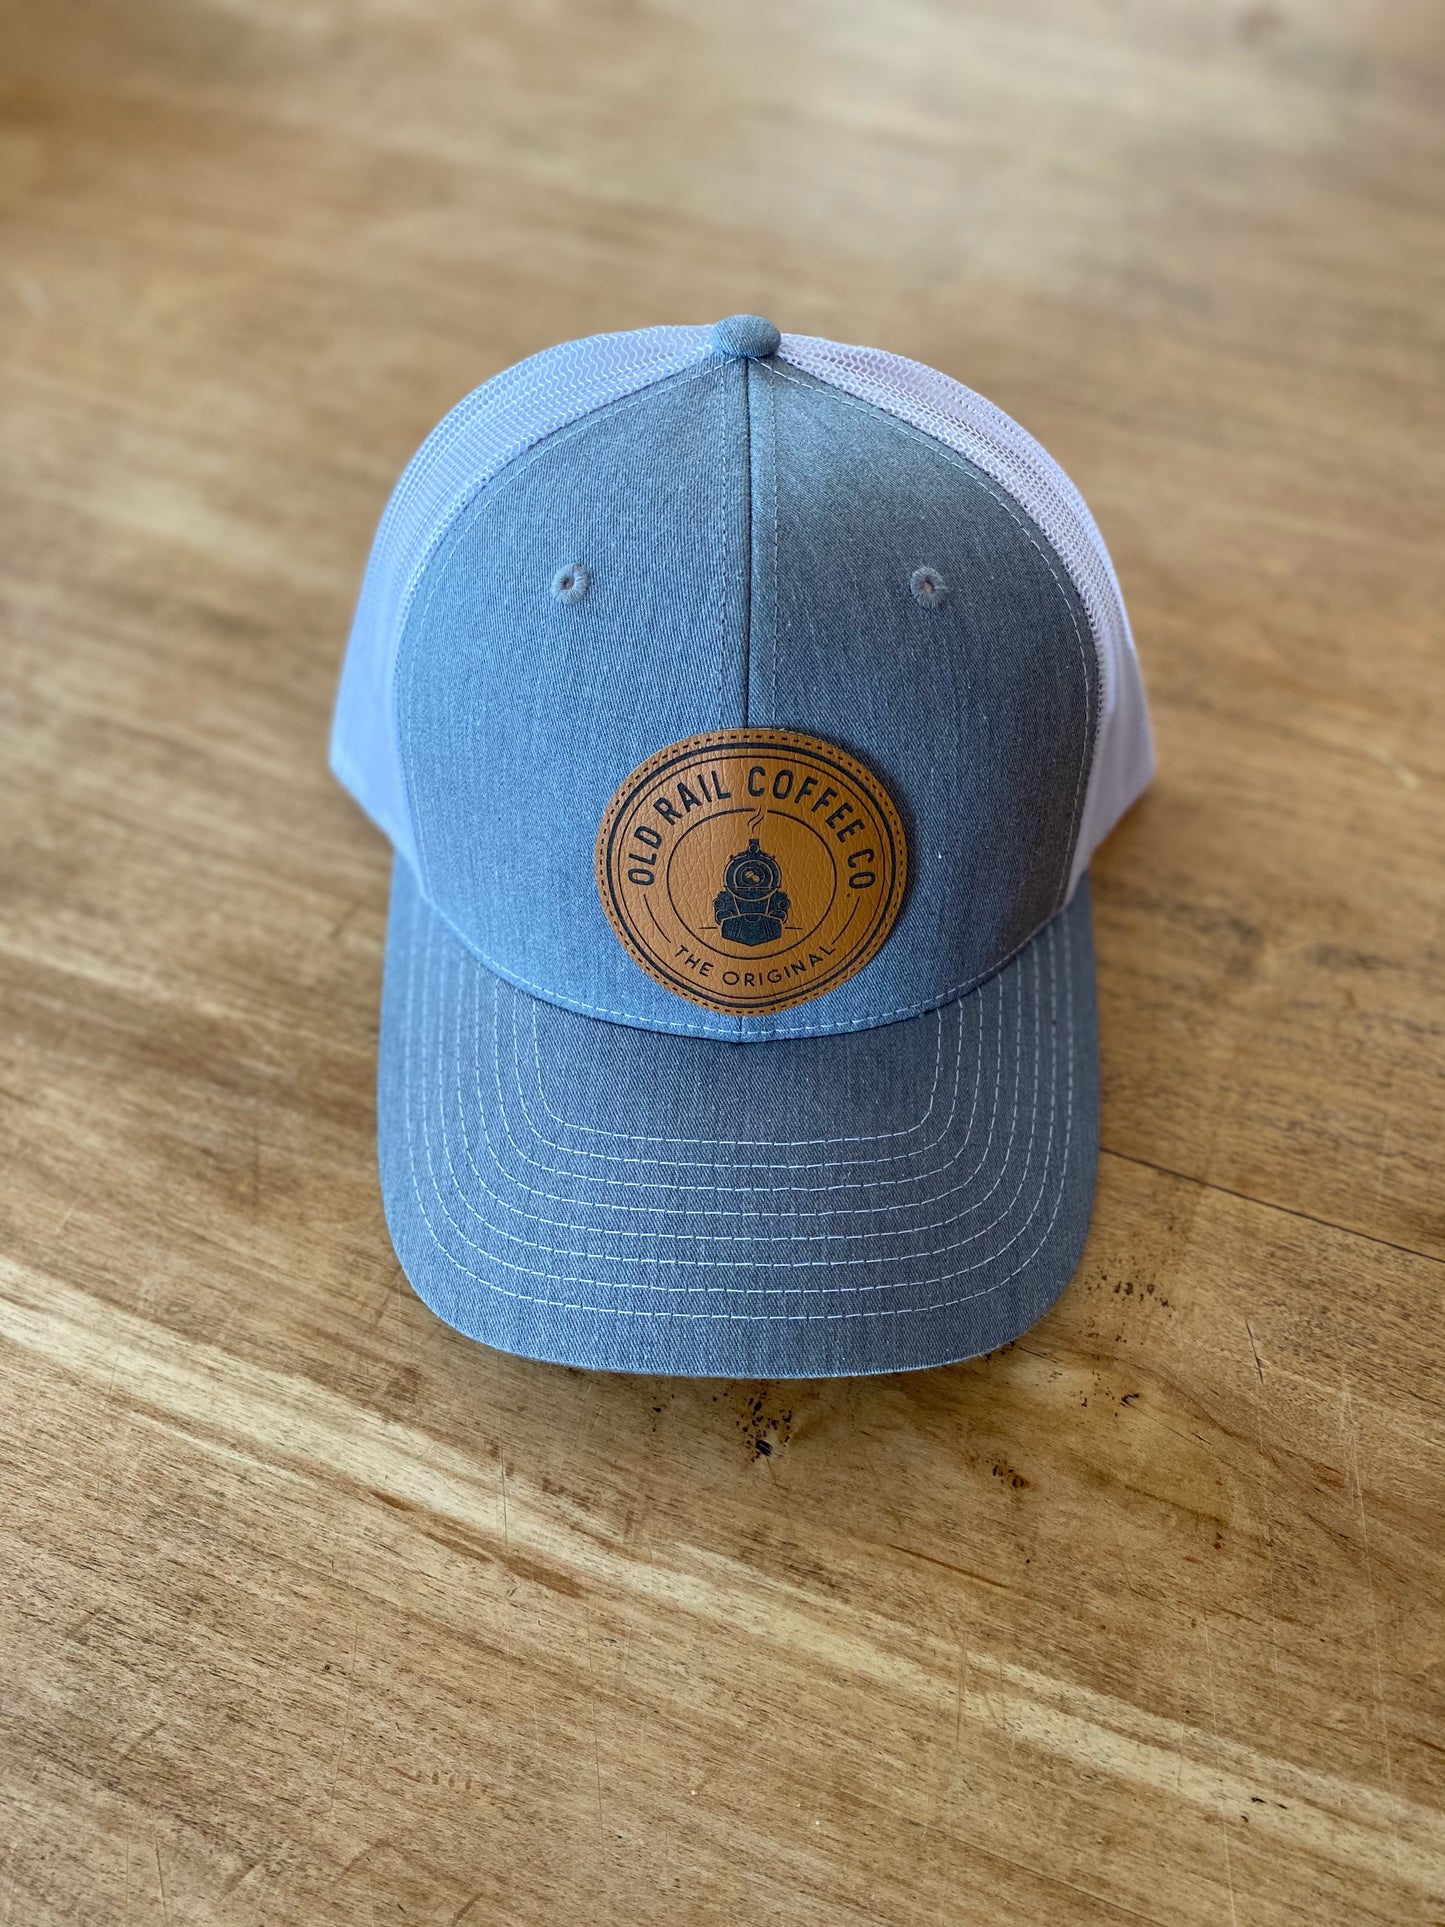 Old Rail Coffee Co Snapback, Blue, White Mesh, Adjustable Snapback, Circle Leather Patch Logo, Represent your favorite Coffee Company